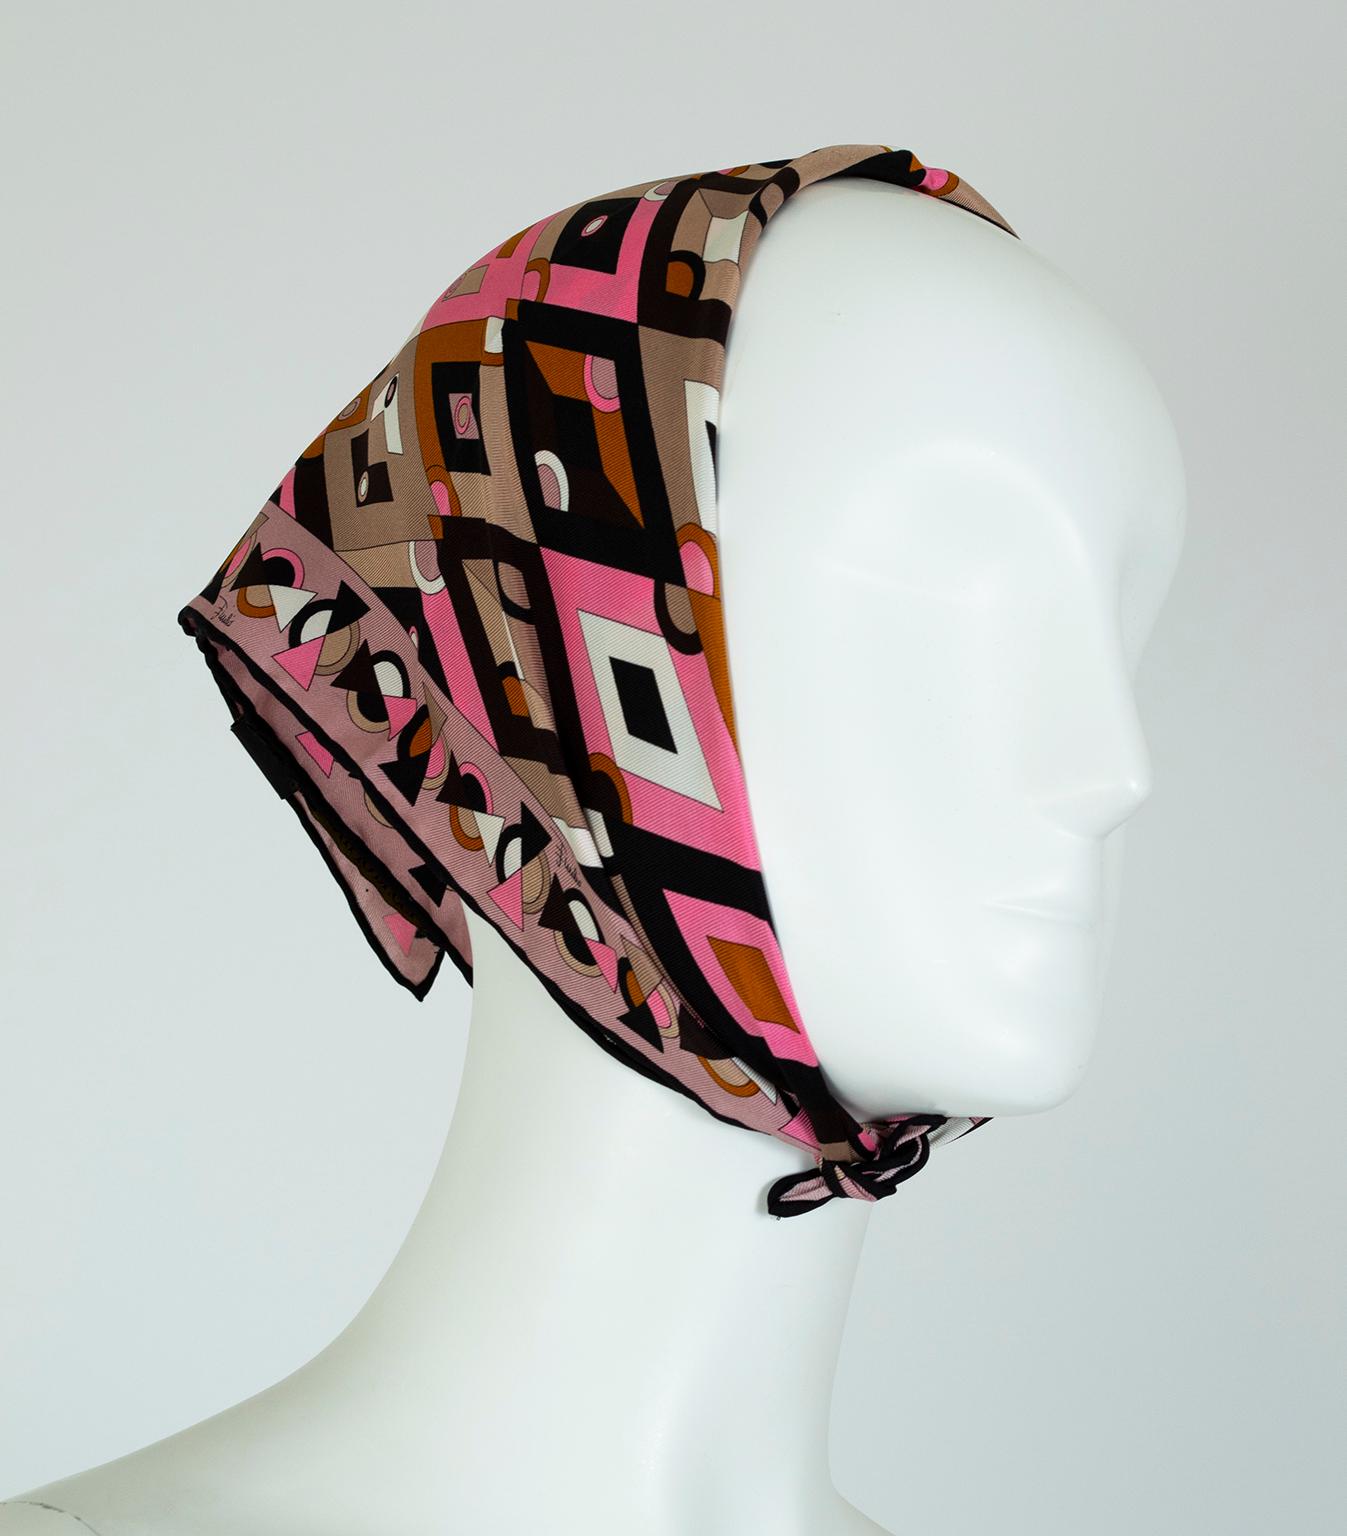 Sometimes all an outfit needs is a pop of color. This vibrant scarf combines searing color and psychedelic print in the way only Emilio Pucci can, and its smaller footprint permits wearing in a multitude of ways: as a head scarf, a neck wrap, a